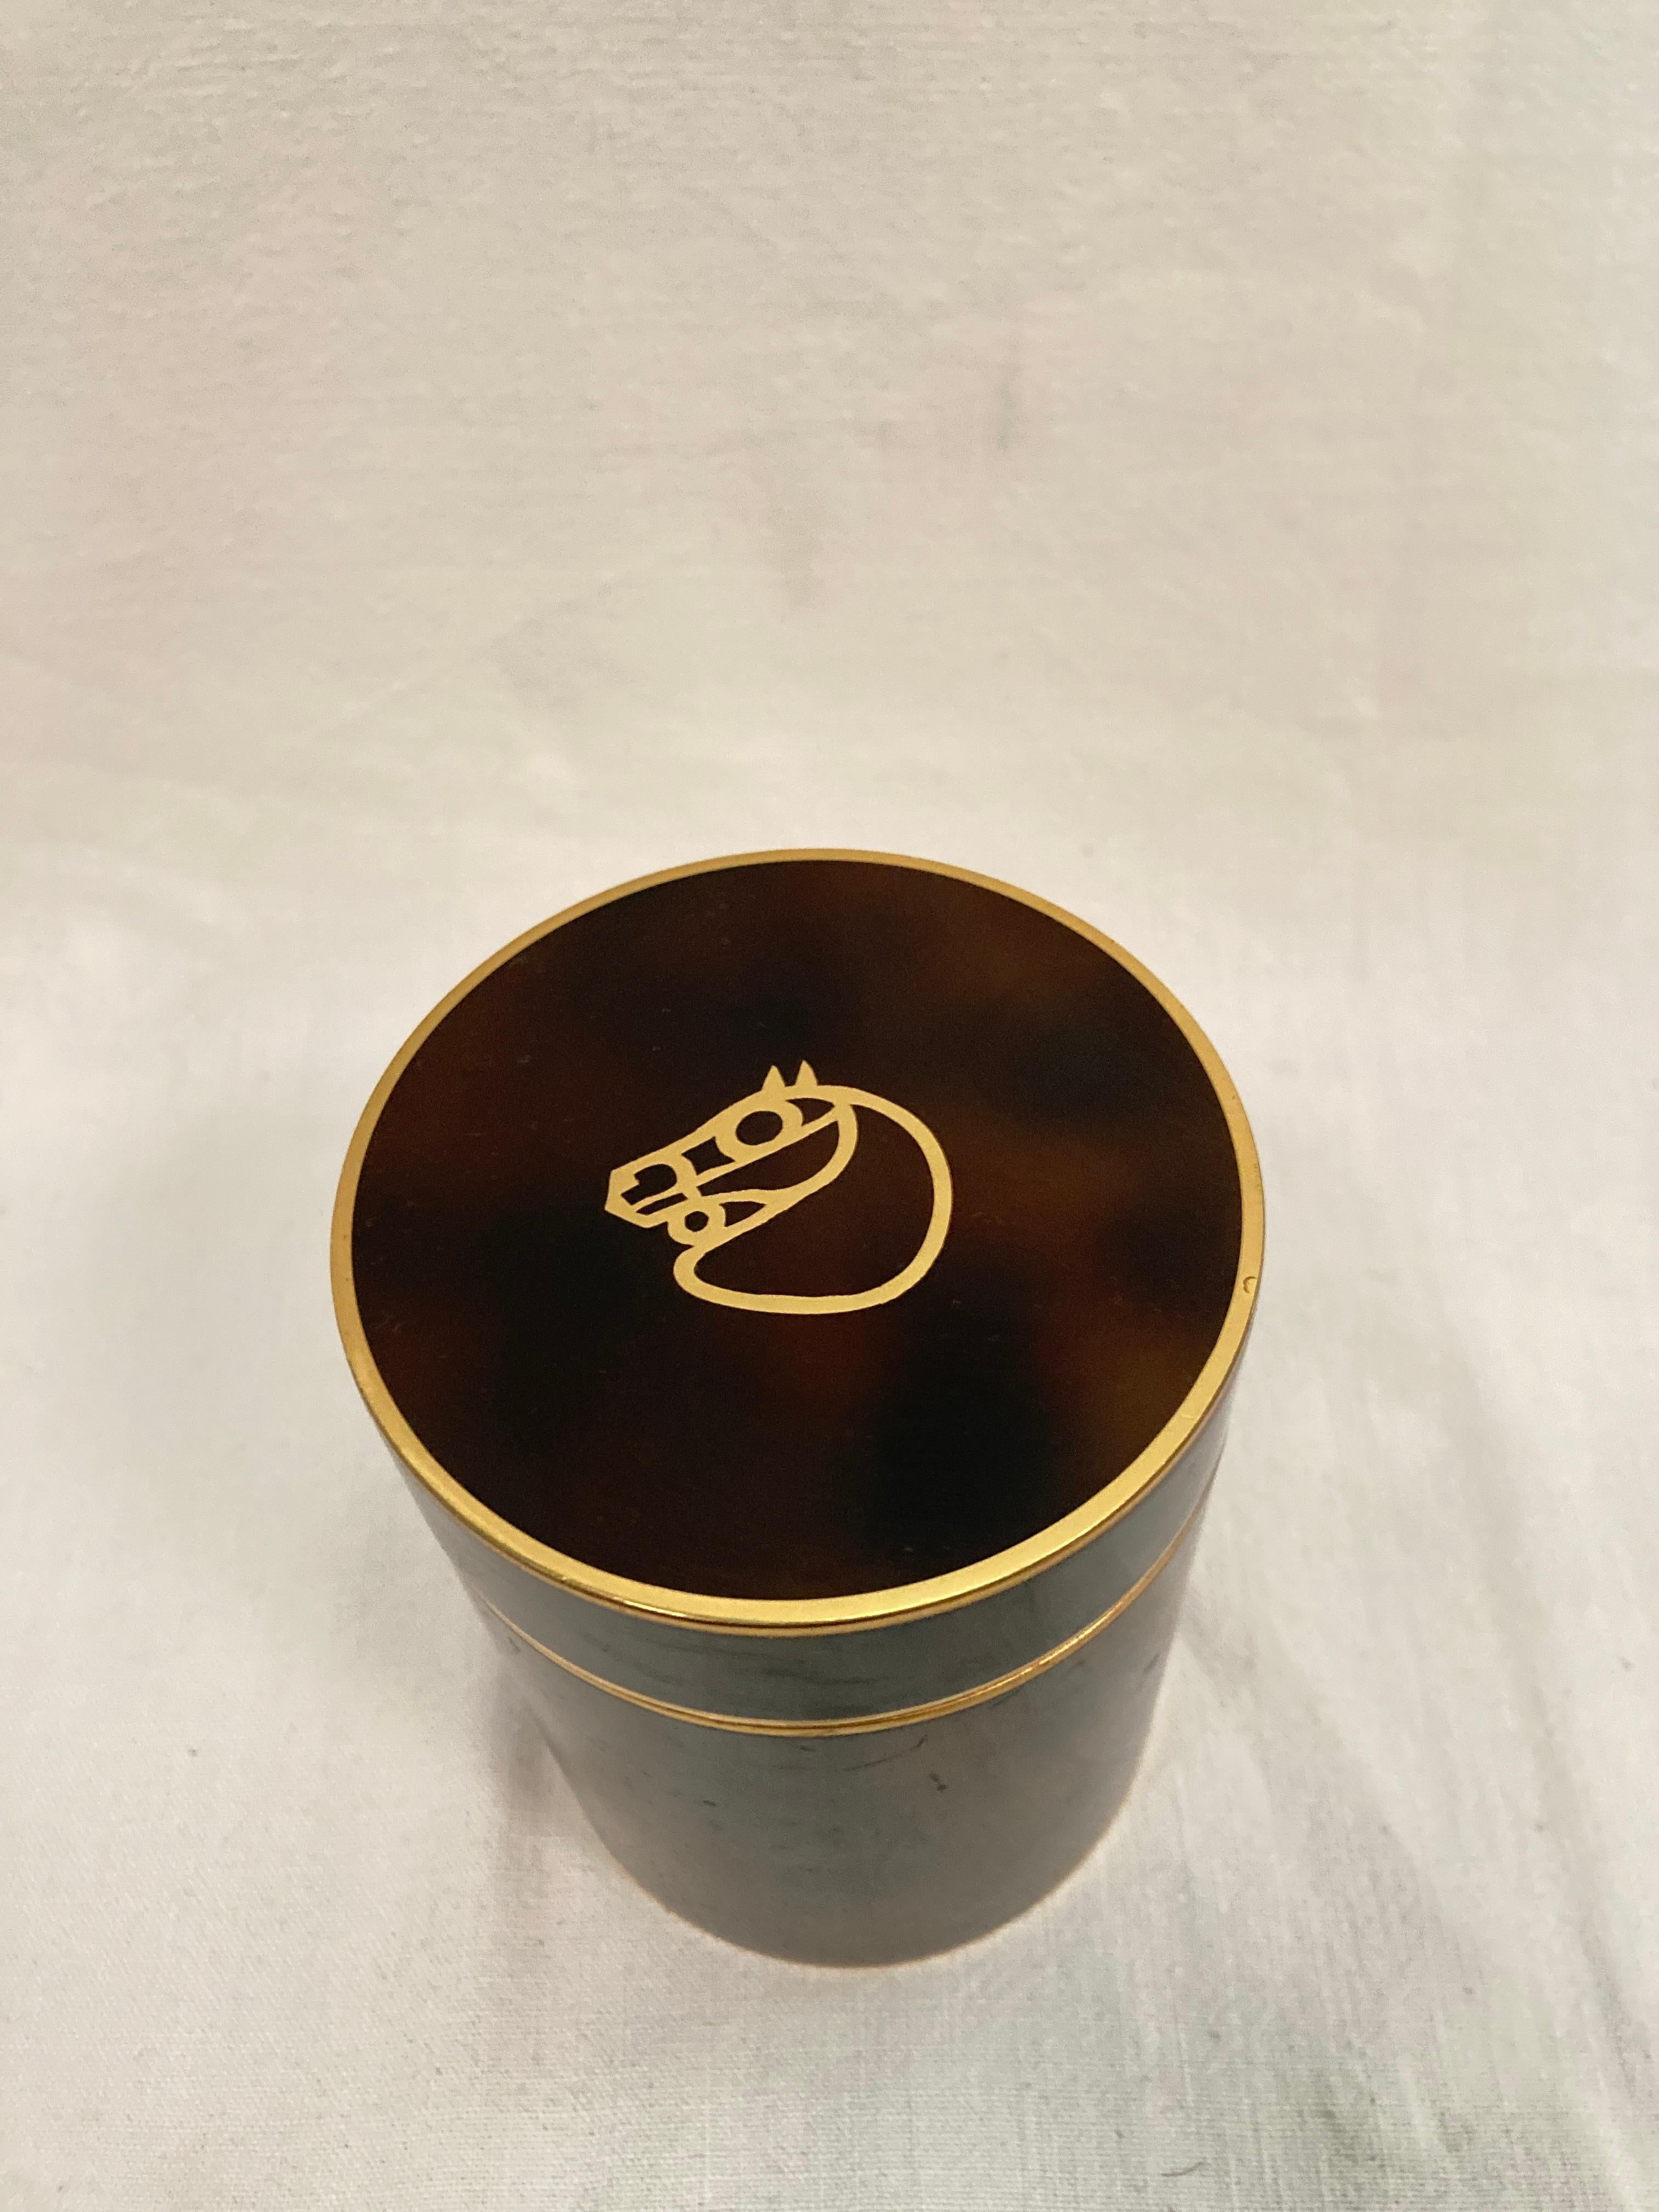 Very nice lacquered metal boxe sowing a head horse
Good condition
Signed